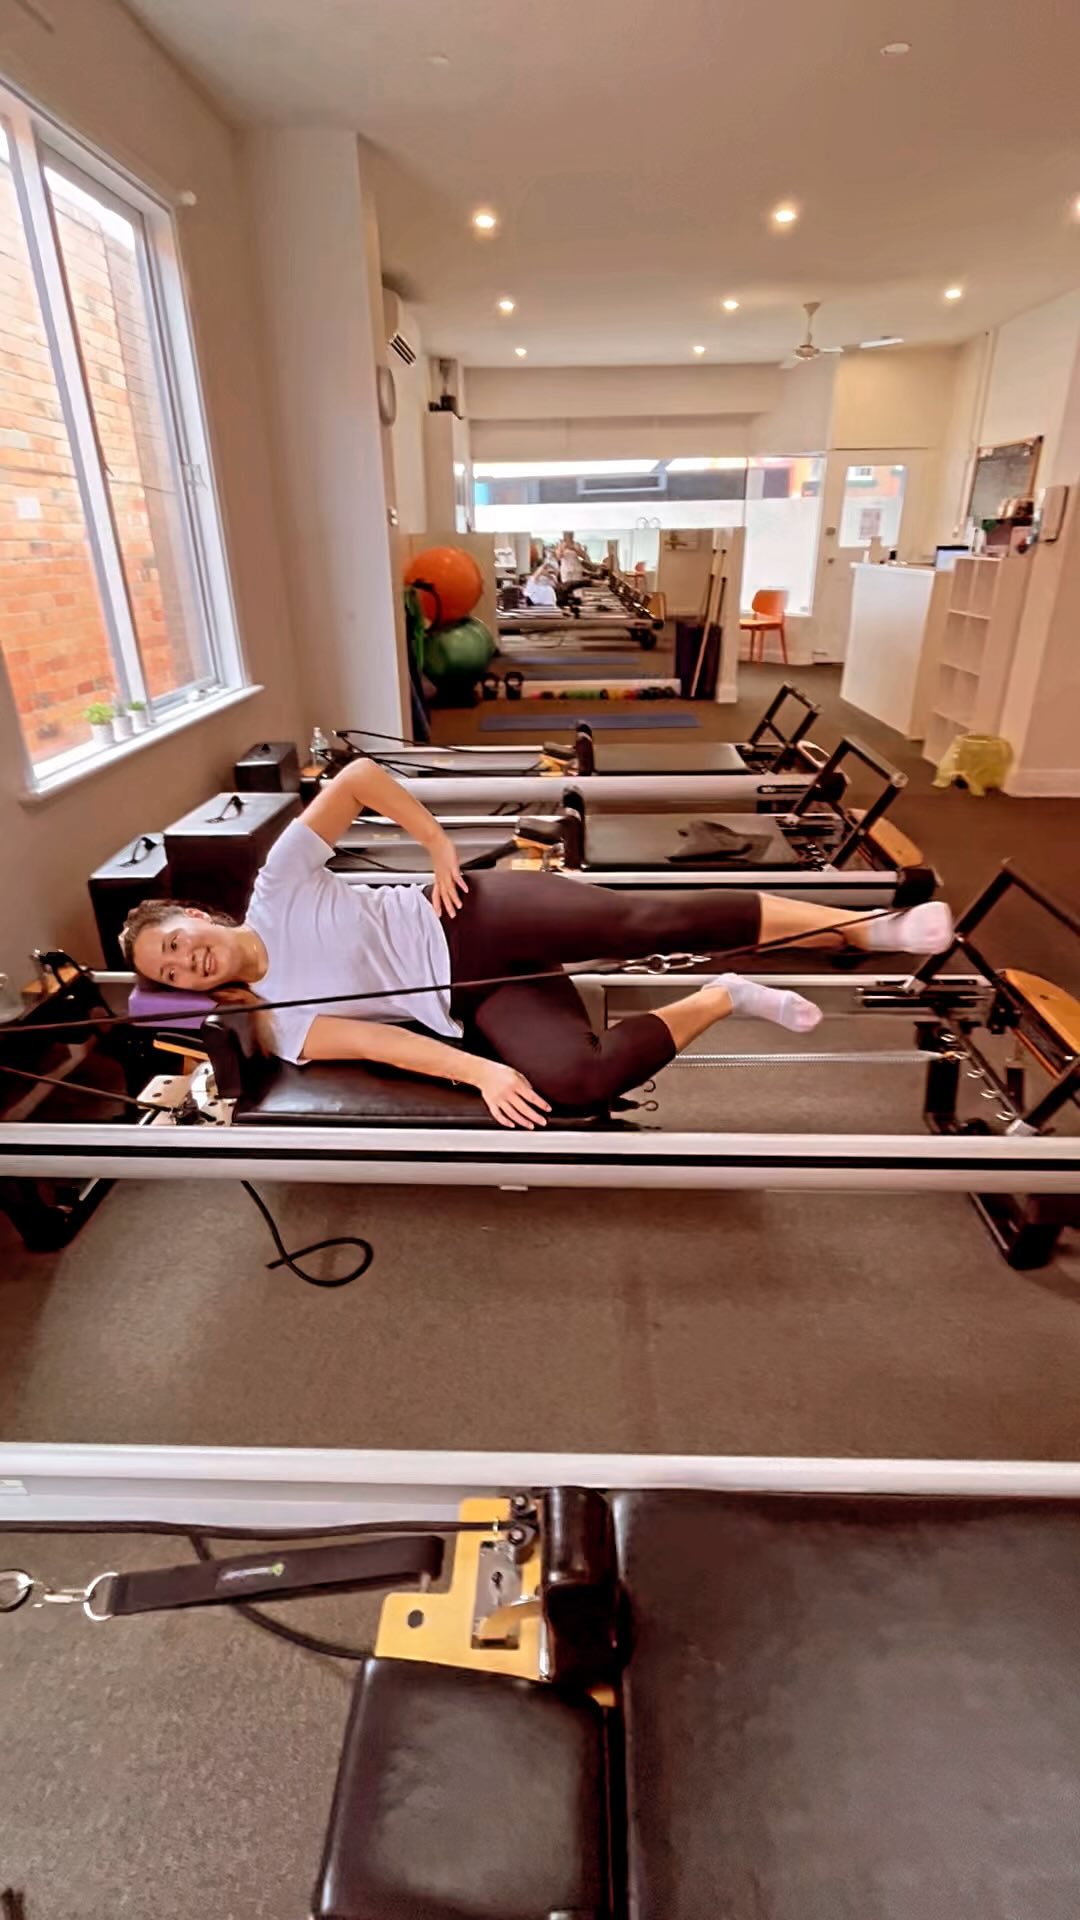 Sidelying glutes with leg in strap on the reformer is a wonderful exercise to strengthen your hips!
For an extra challenge add a leg lift (hip abduction) ️